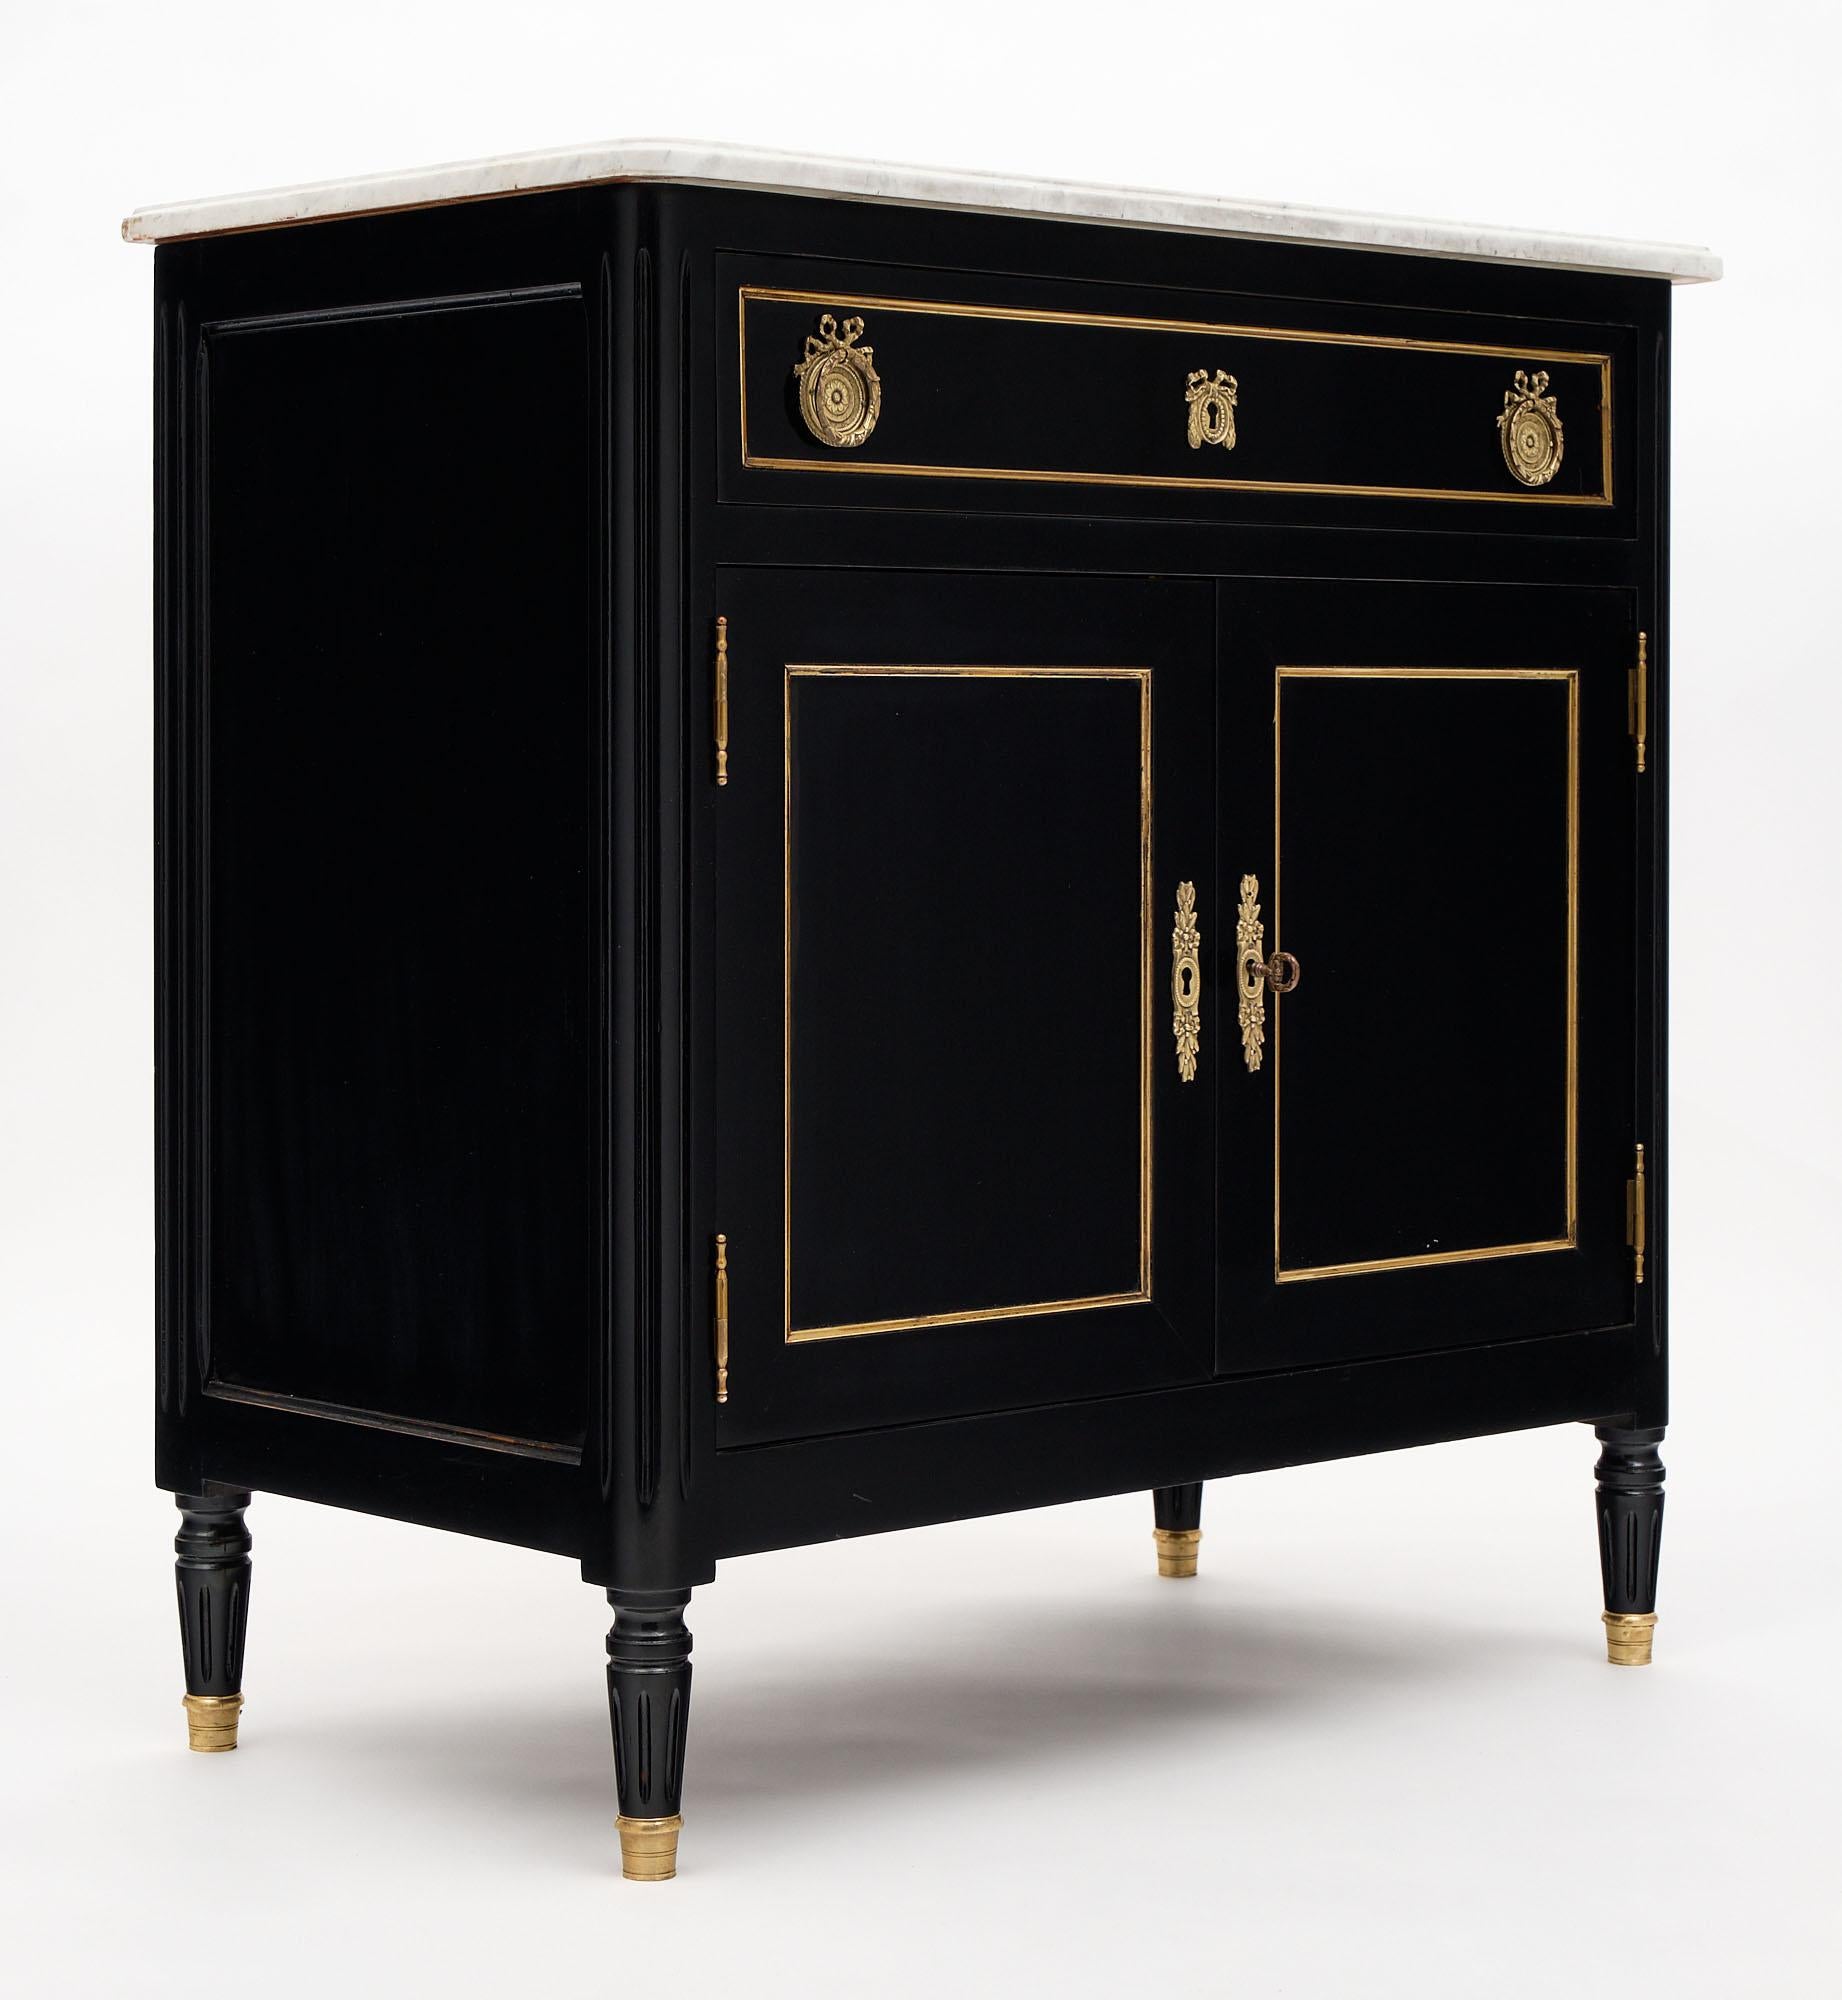 Petite Louis XVI style French buffet made of mahogany and ebonized with a lustrous French polish museum-quality finish. The buffet is topped with a Carrara marble slab. This small cabinet features a single dovetailed drawer above two doors which